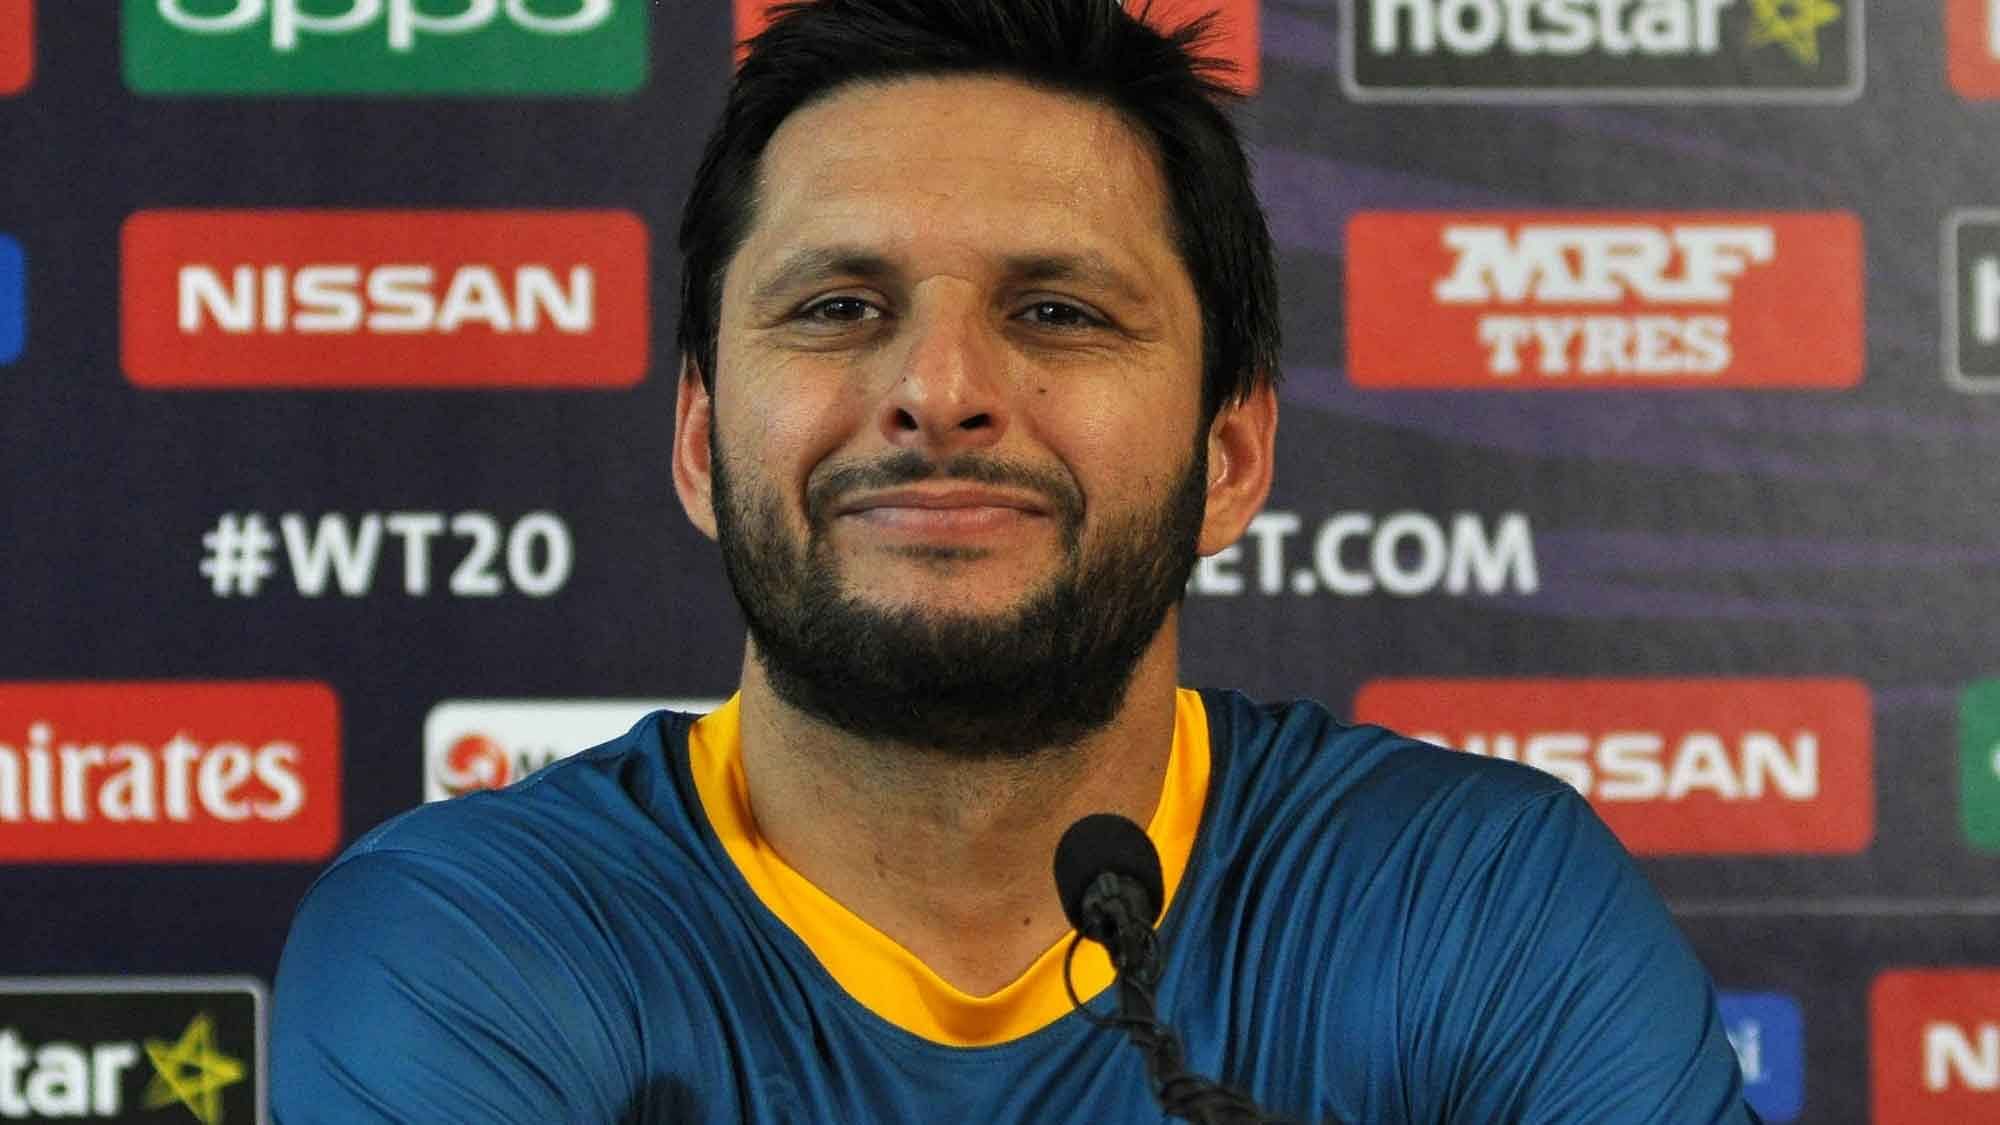 Shahid Afridi last played for Pakistan in the WT20 where he was also the captain of the team.&nbsp;